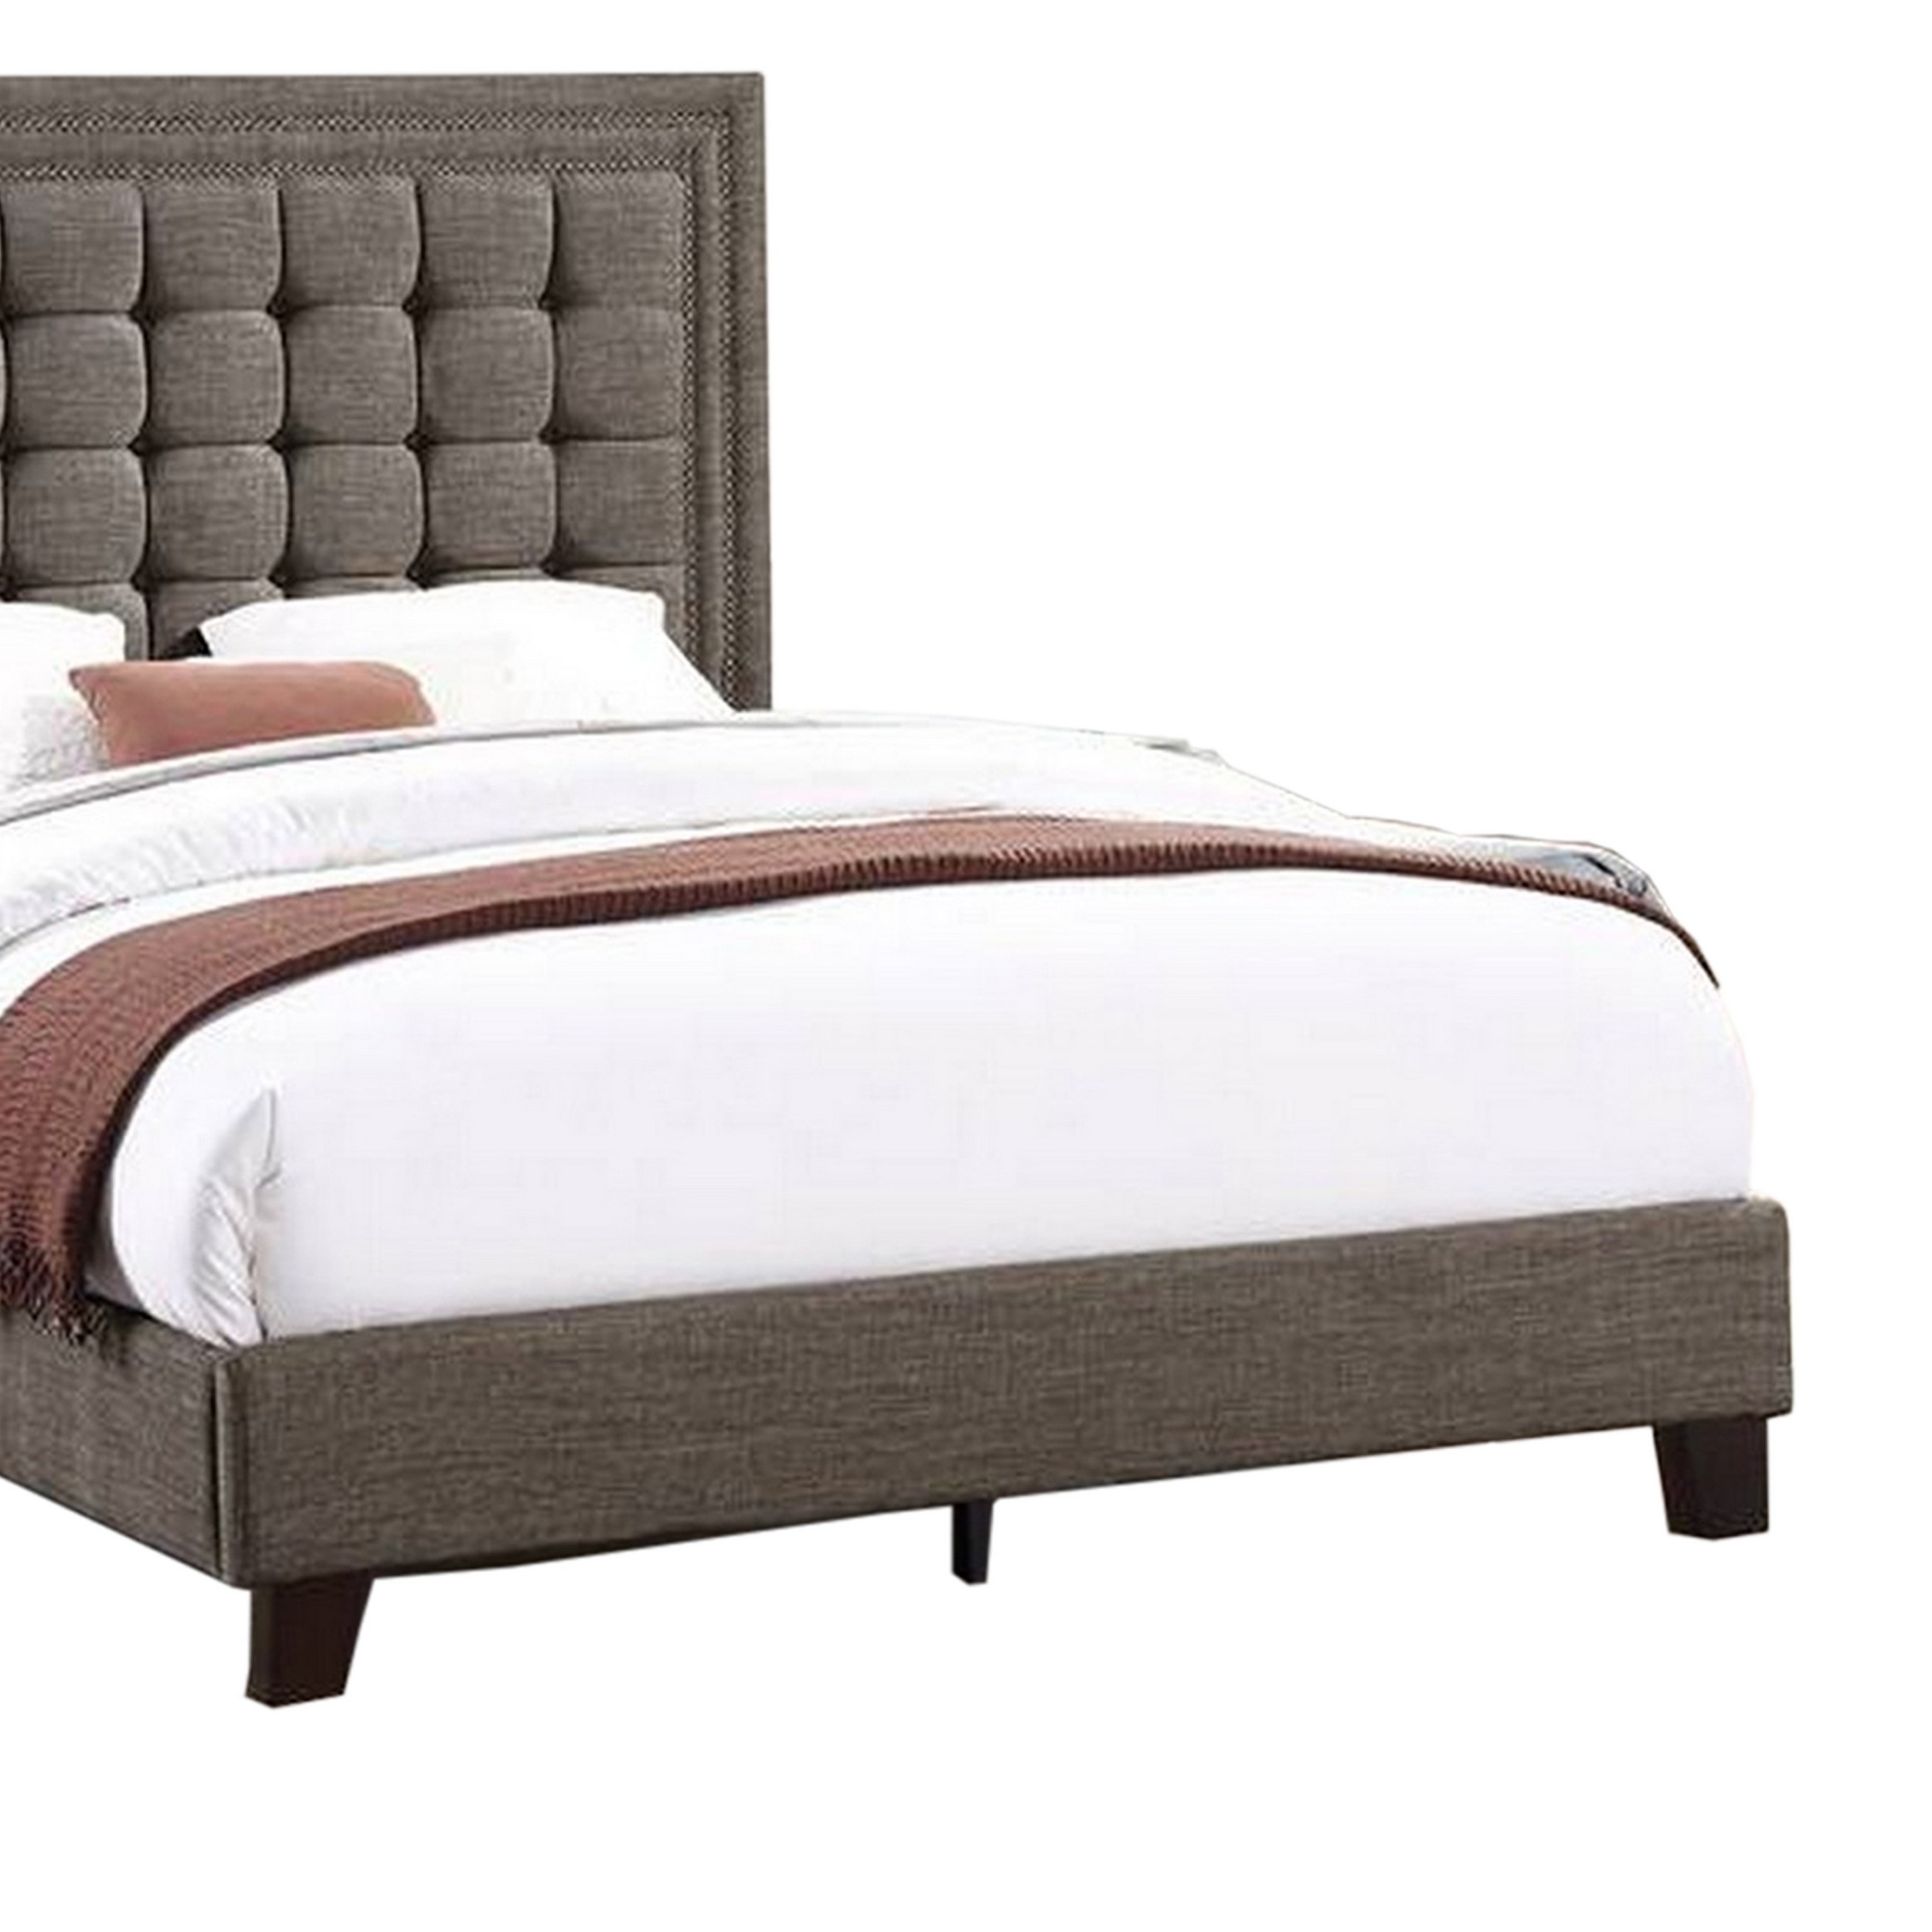 Zofi Modern Full Size Bed, Deep Square Tufted Upholstery, Taupe Polyester- Saltoro Sherpi